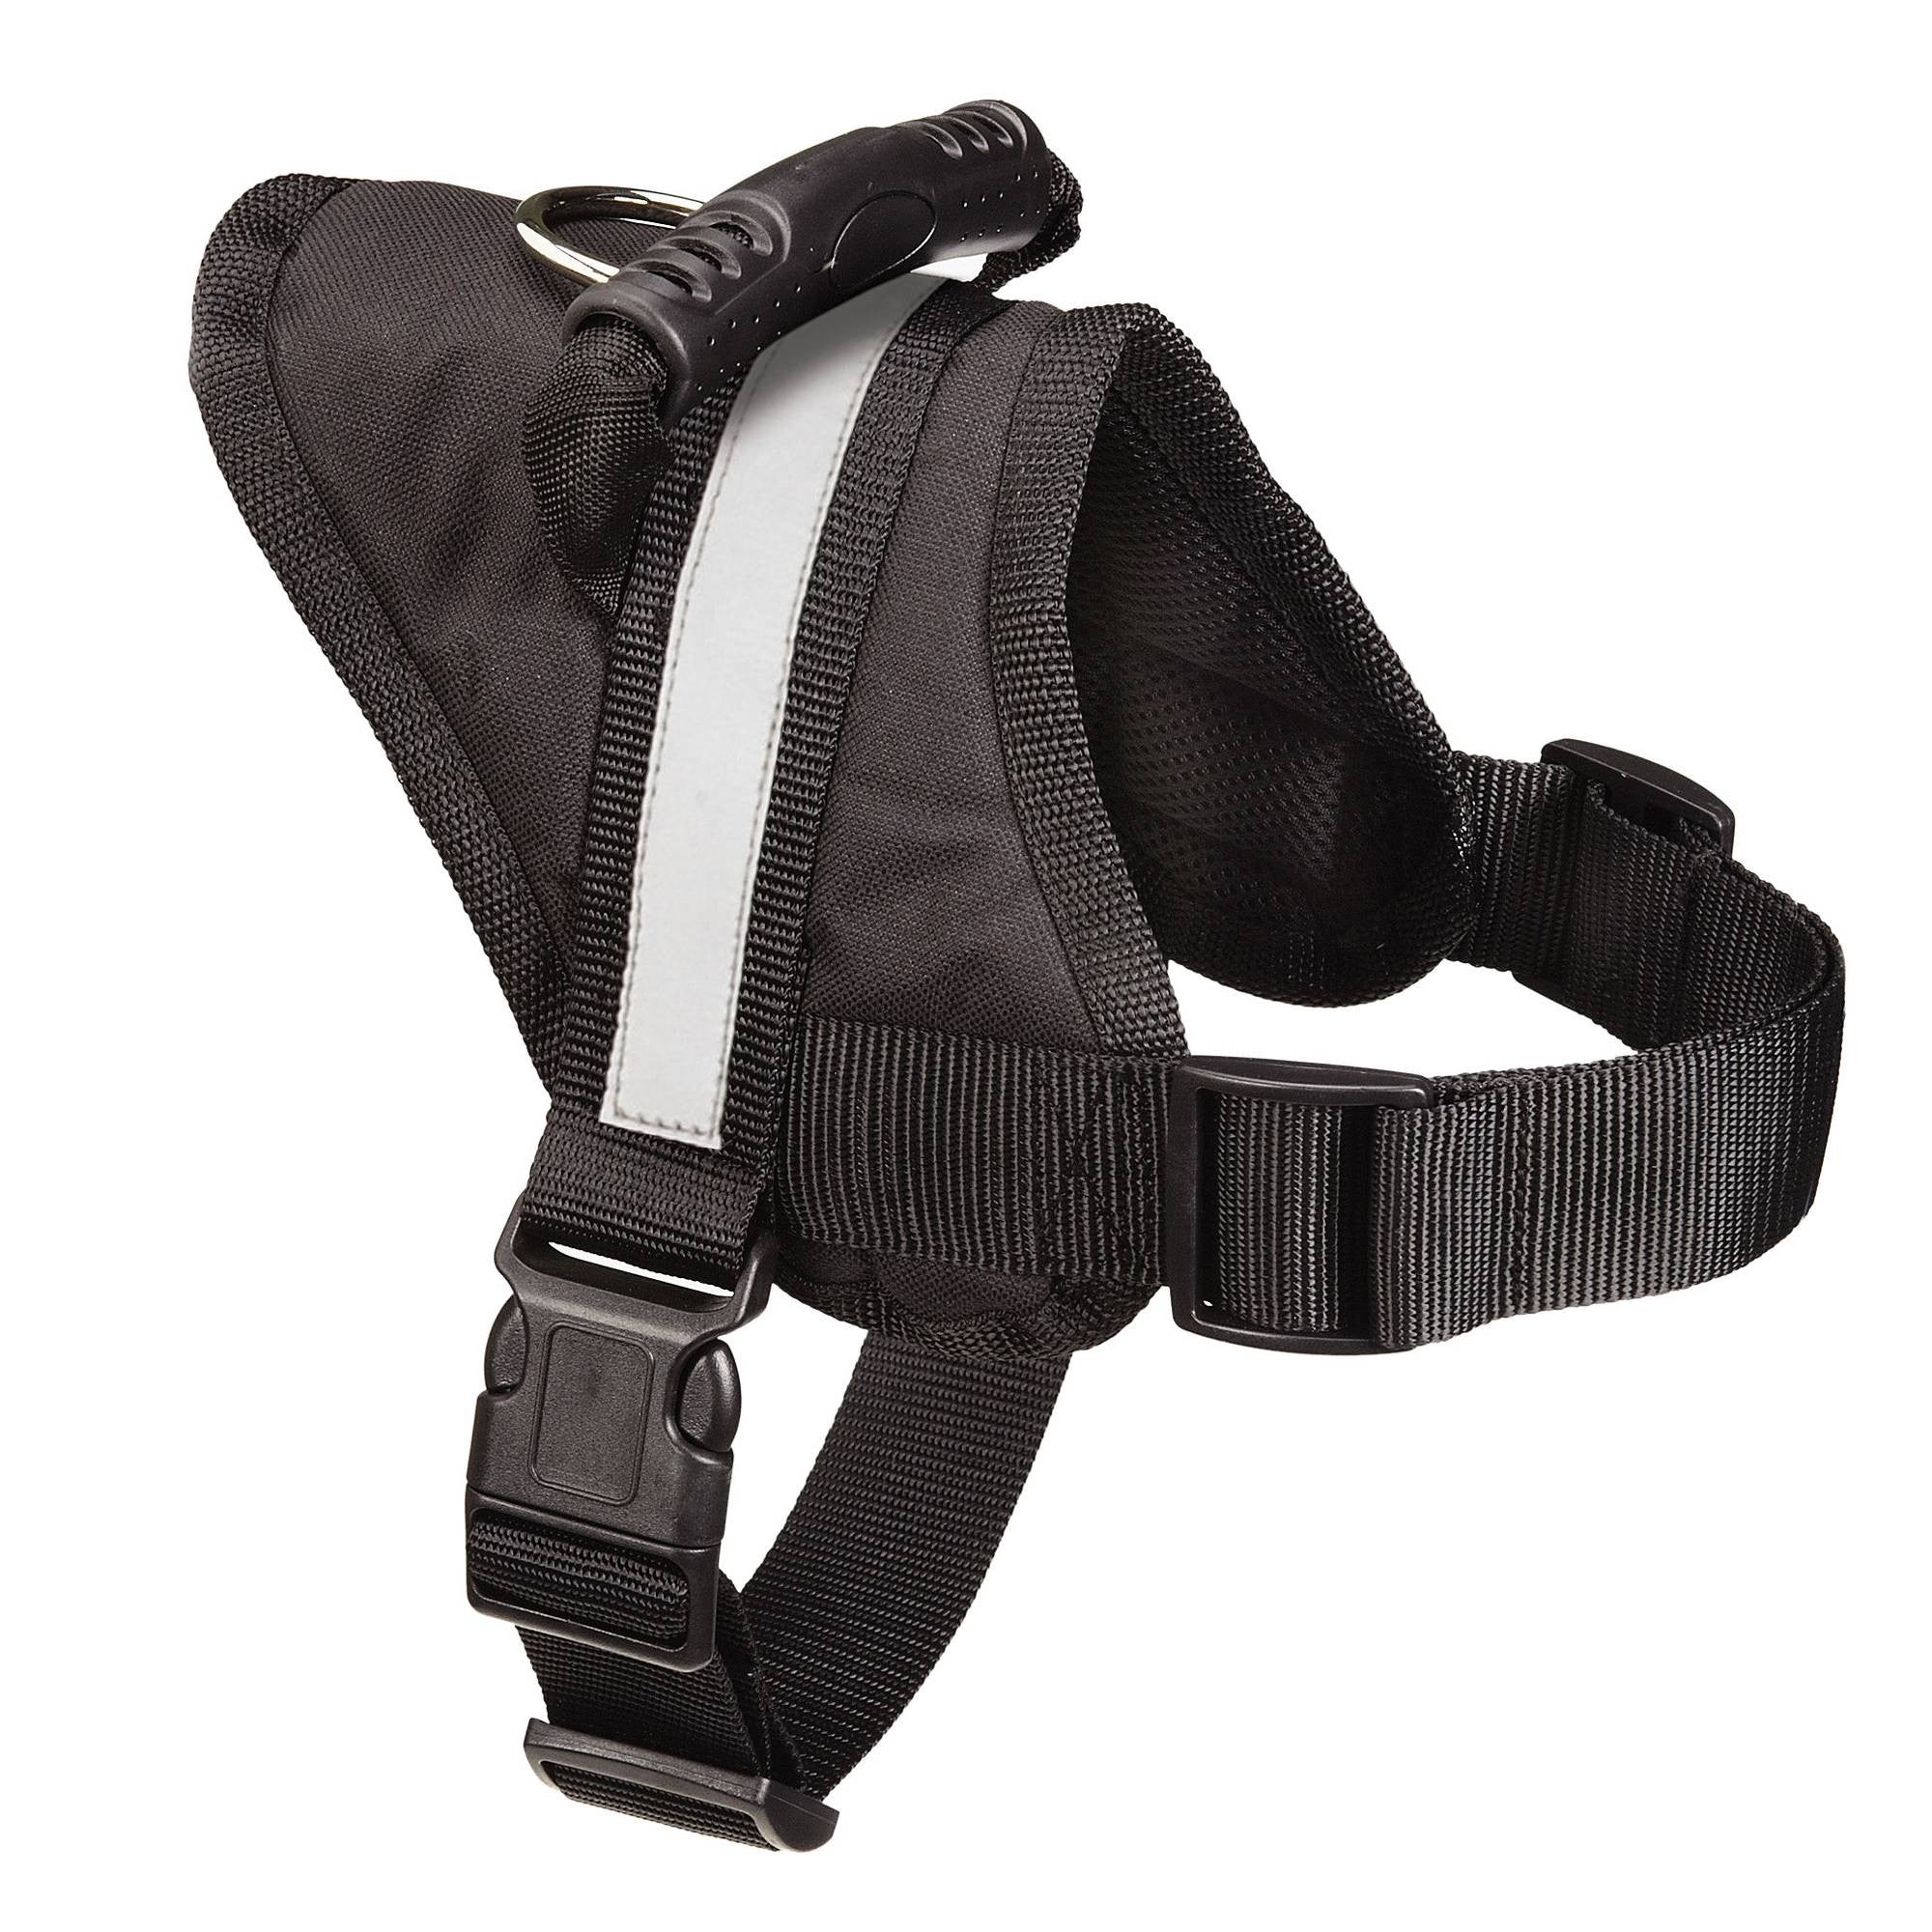 GUARDIAN GEAR EXCURSION HARNESS